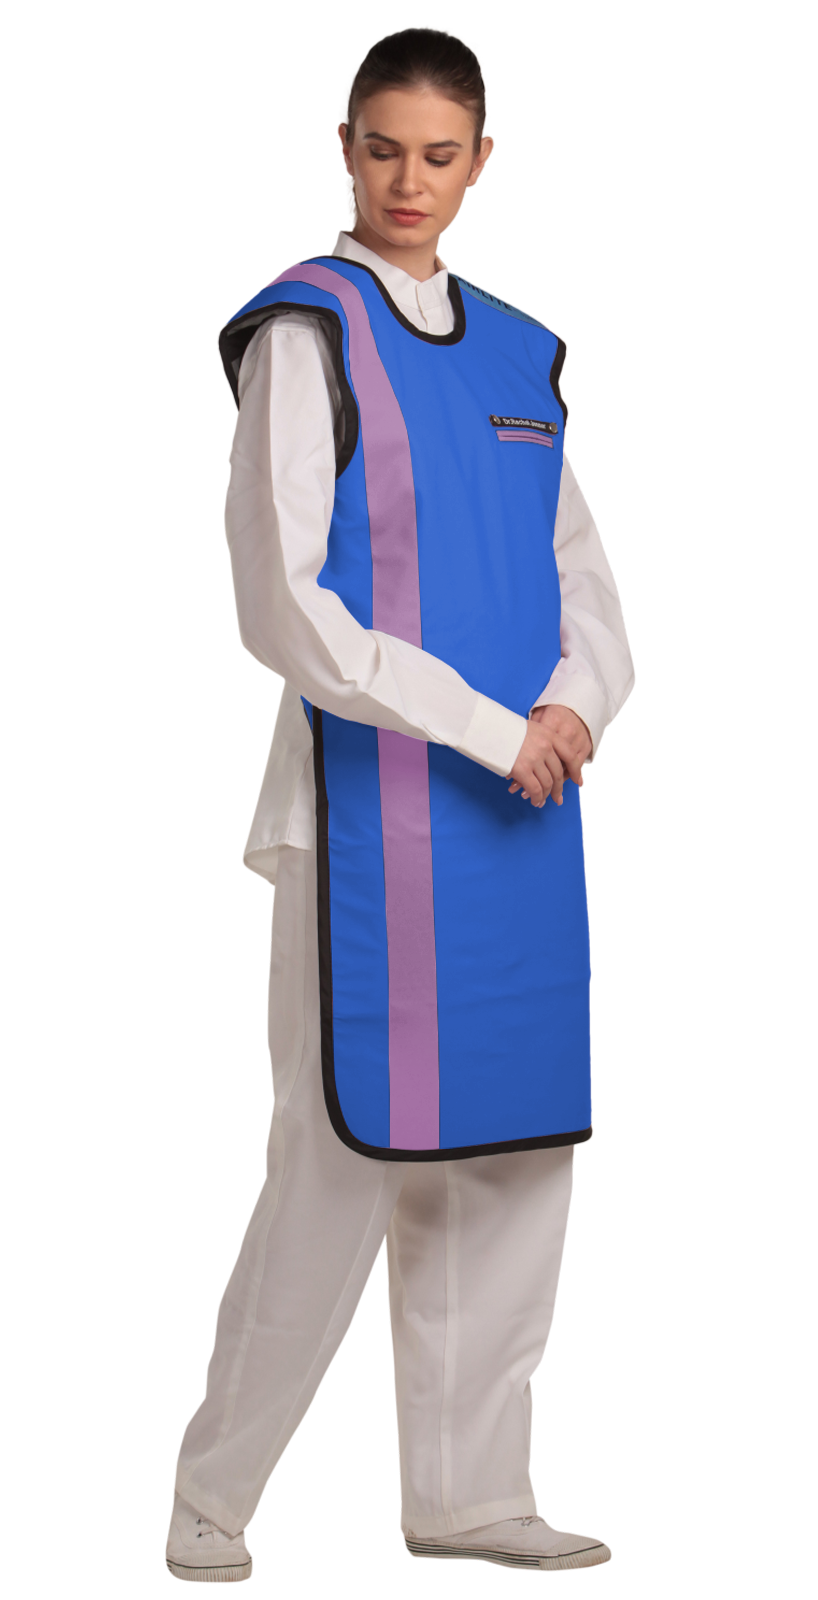 Right partial frontal view of a female model wearing an electric blue, black-lined coat apron with flex back.